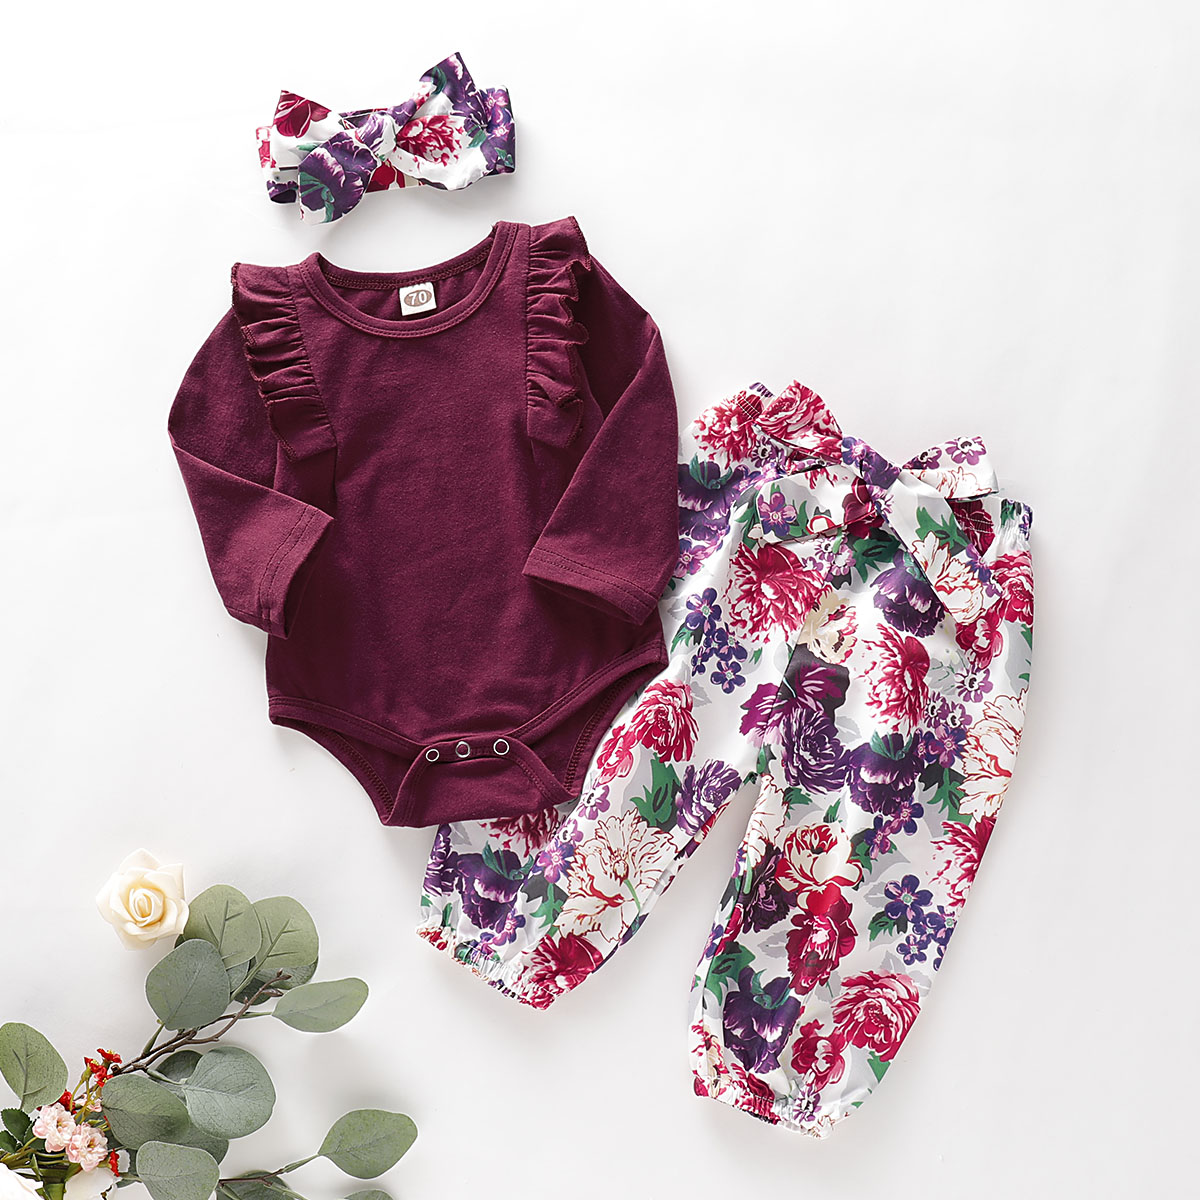 3-piece Baby / Toddler Solid Ruffled Long-sleeve Bodysuit and Floral Allover Pants with Headband Set